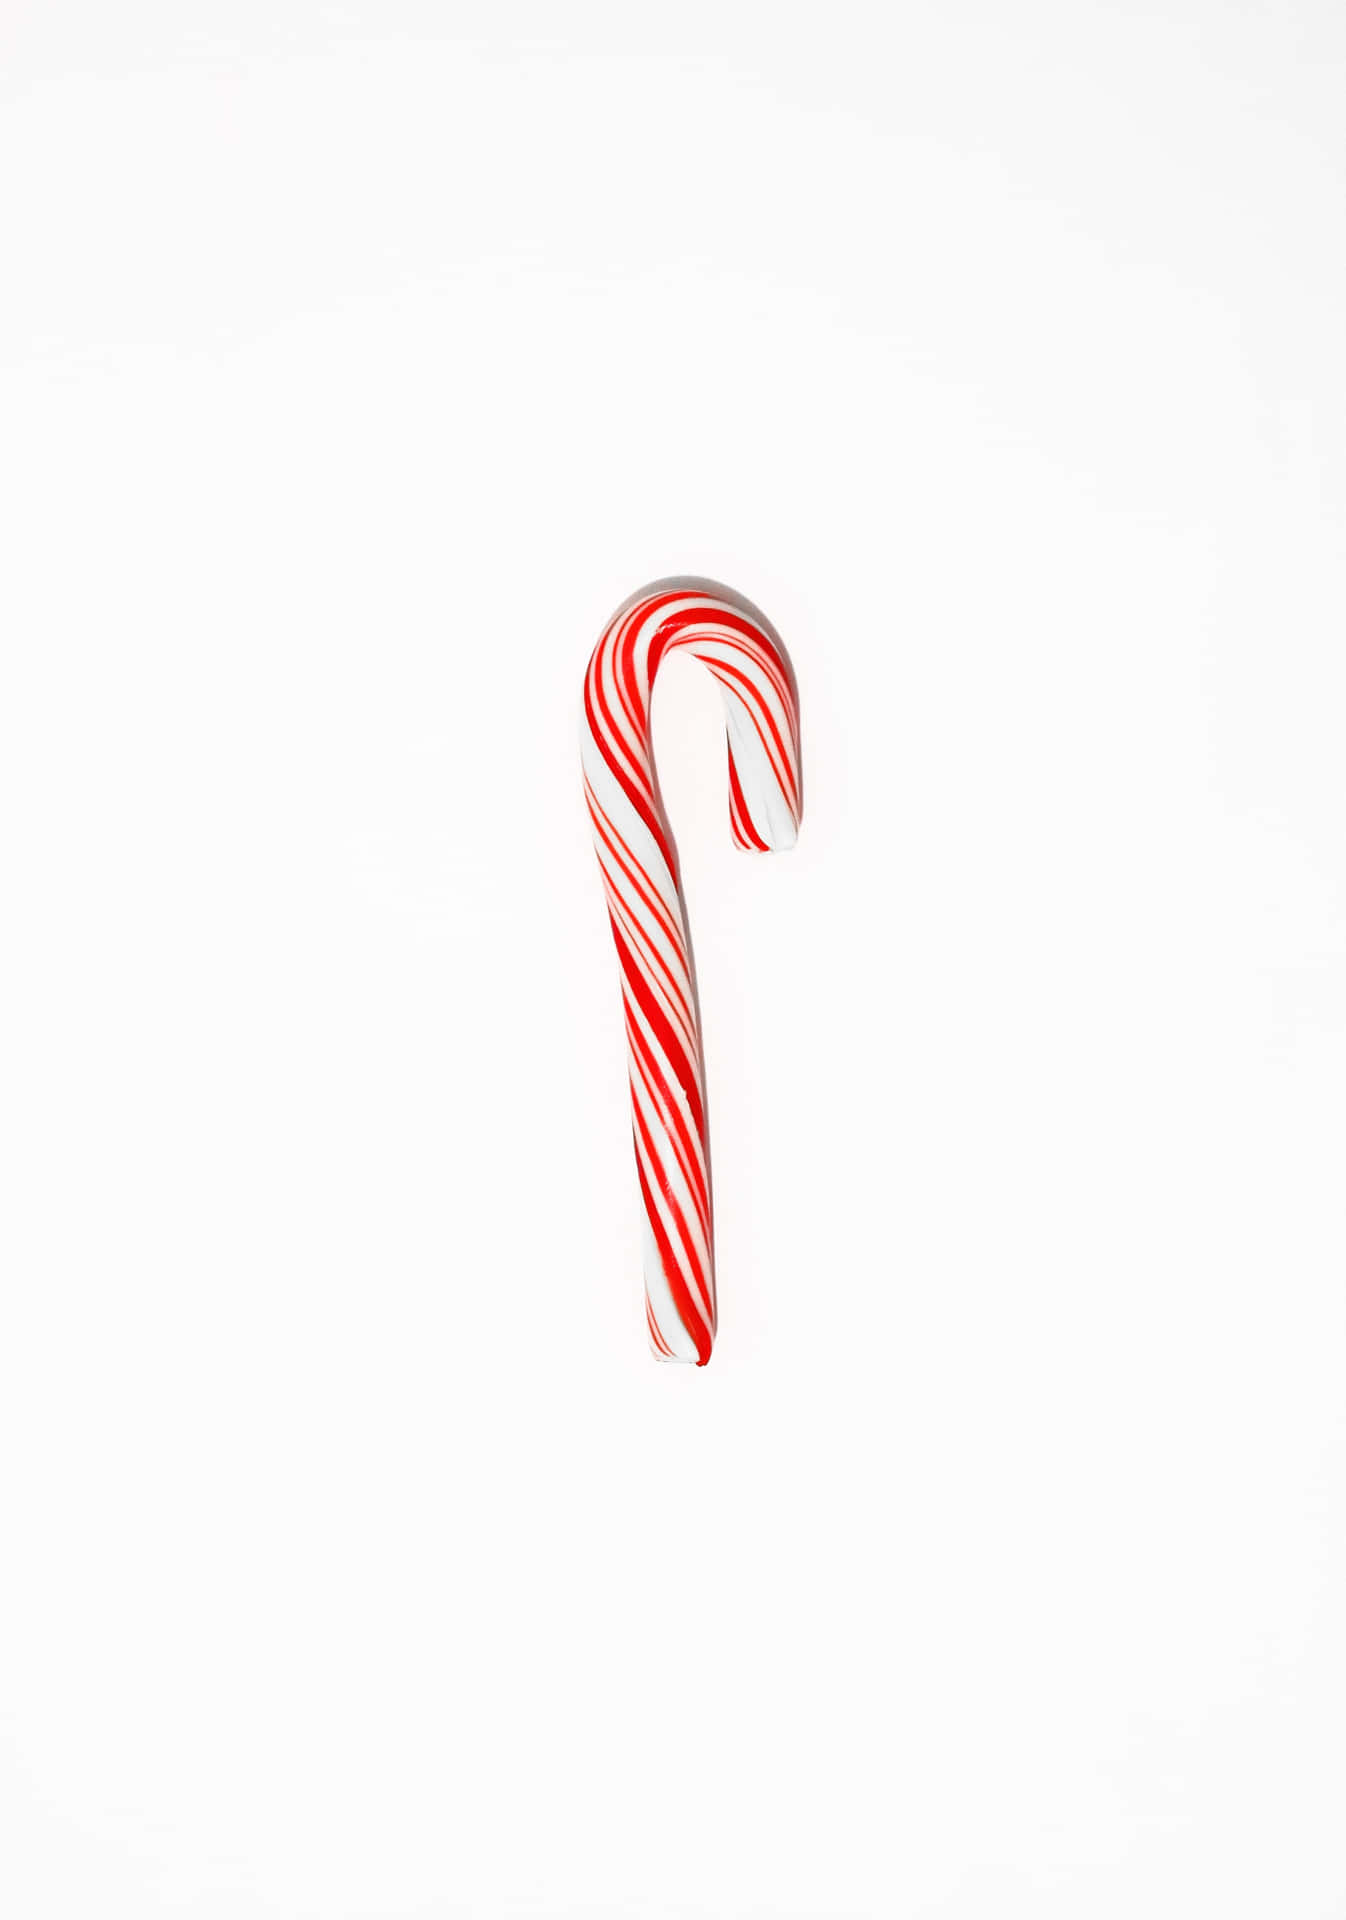 Delicious Candy Cane Deliciously Adorned with Red Stripes